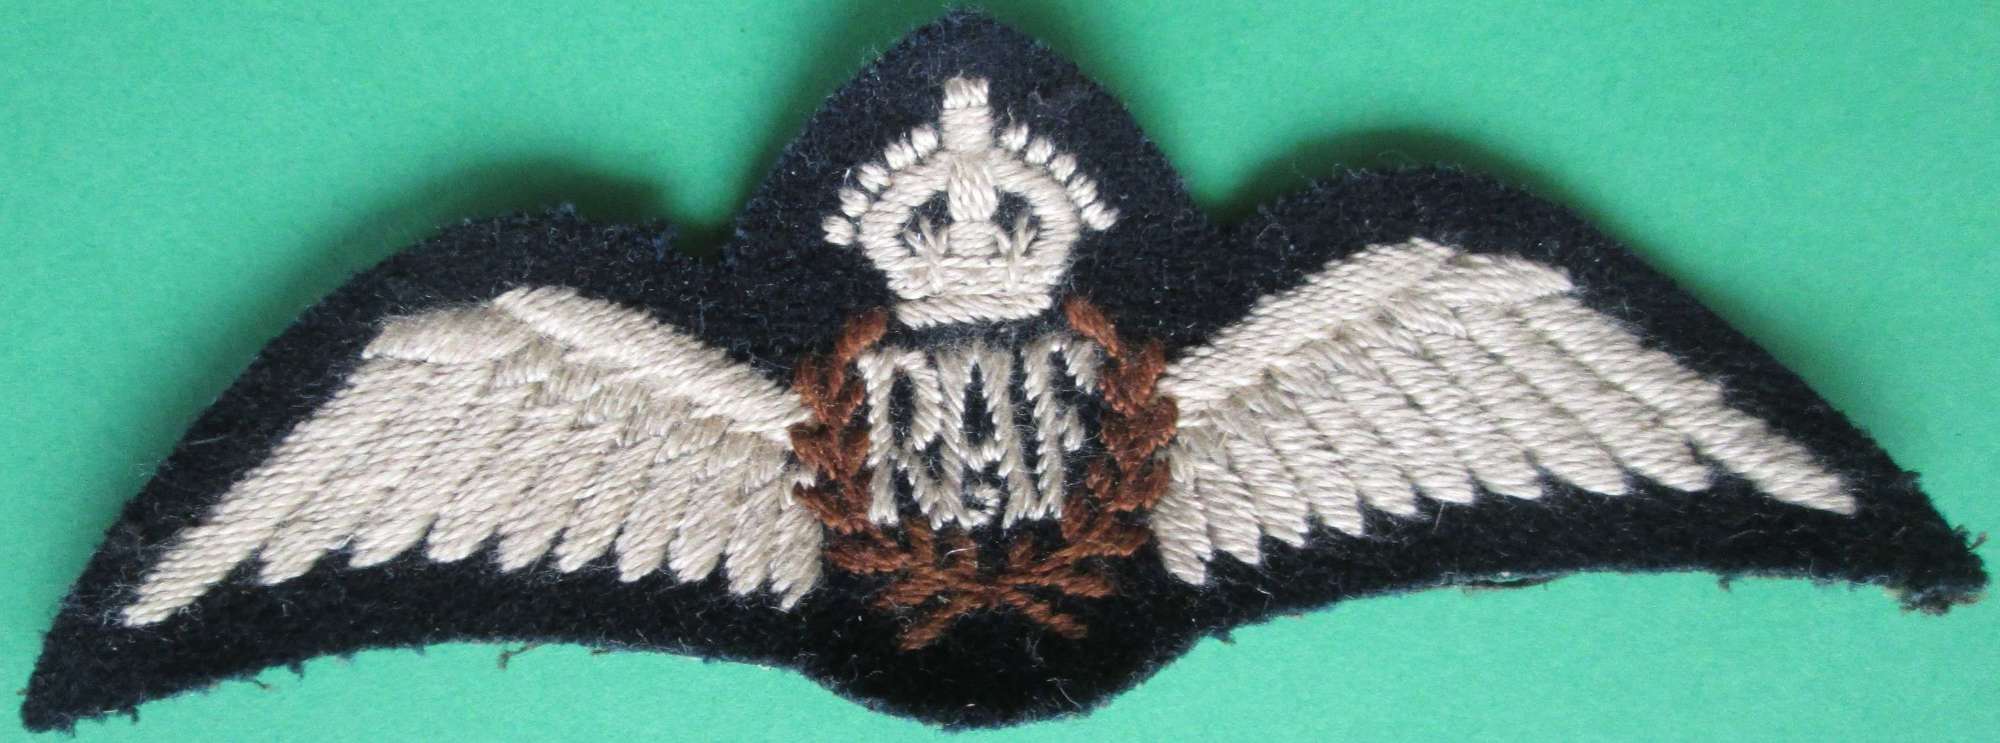 WWII PERIOD FLAT ROYAL AIR FORCE WINGS